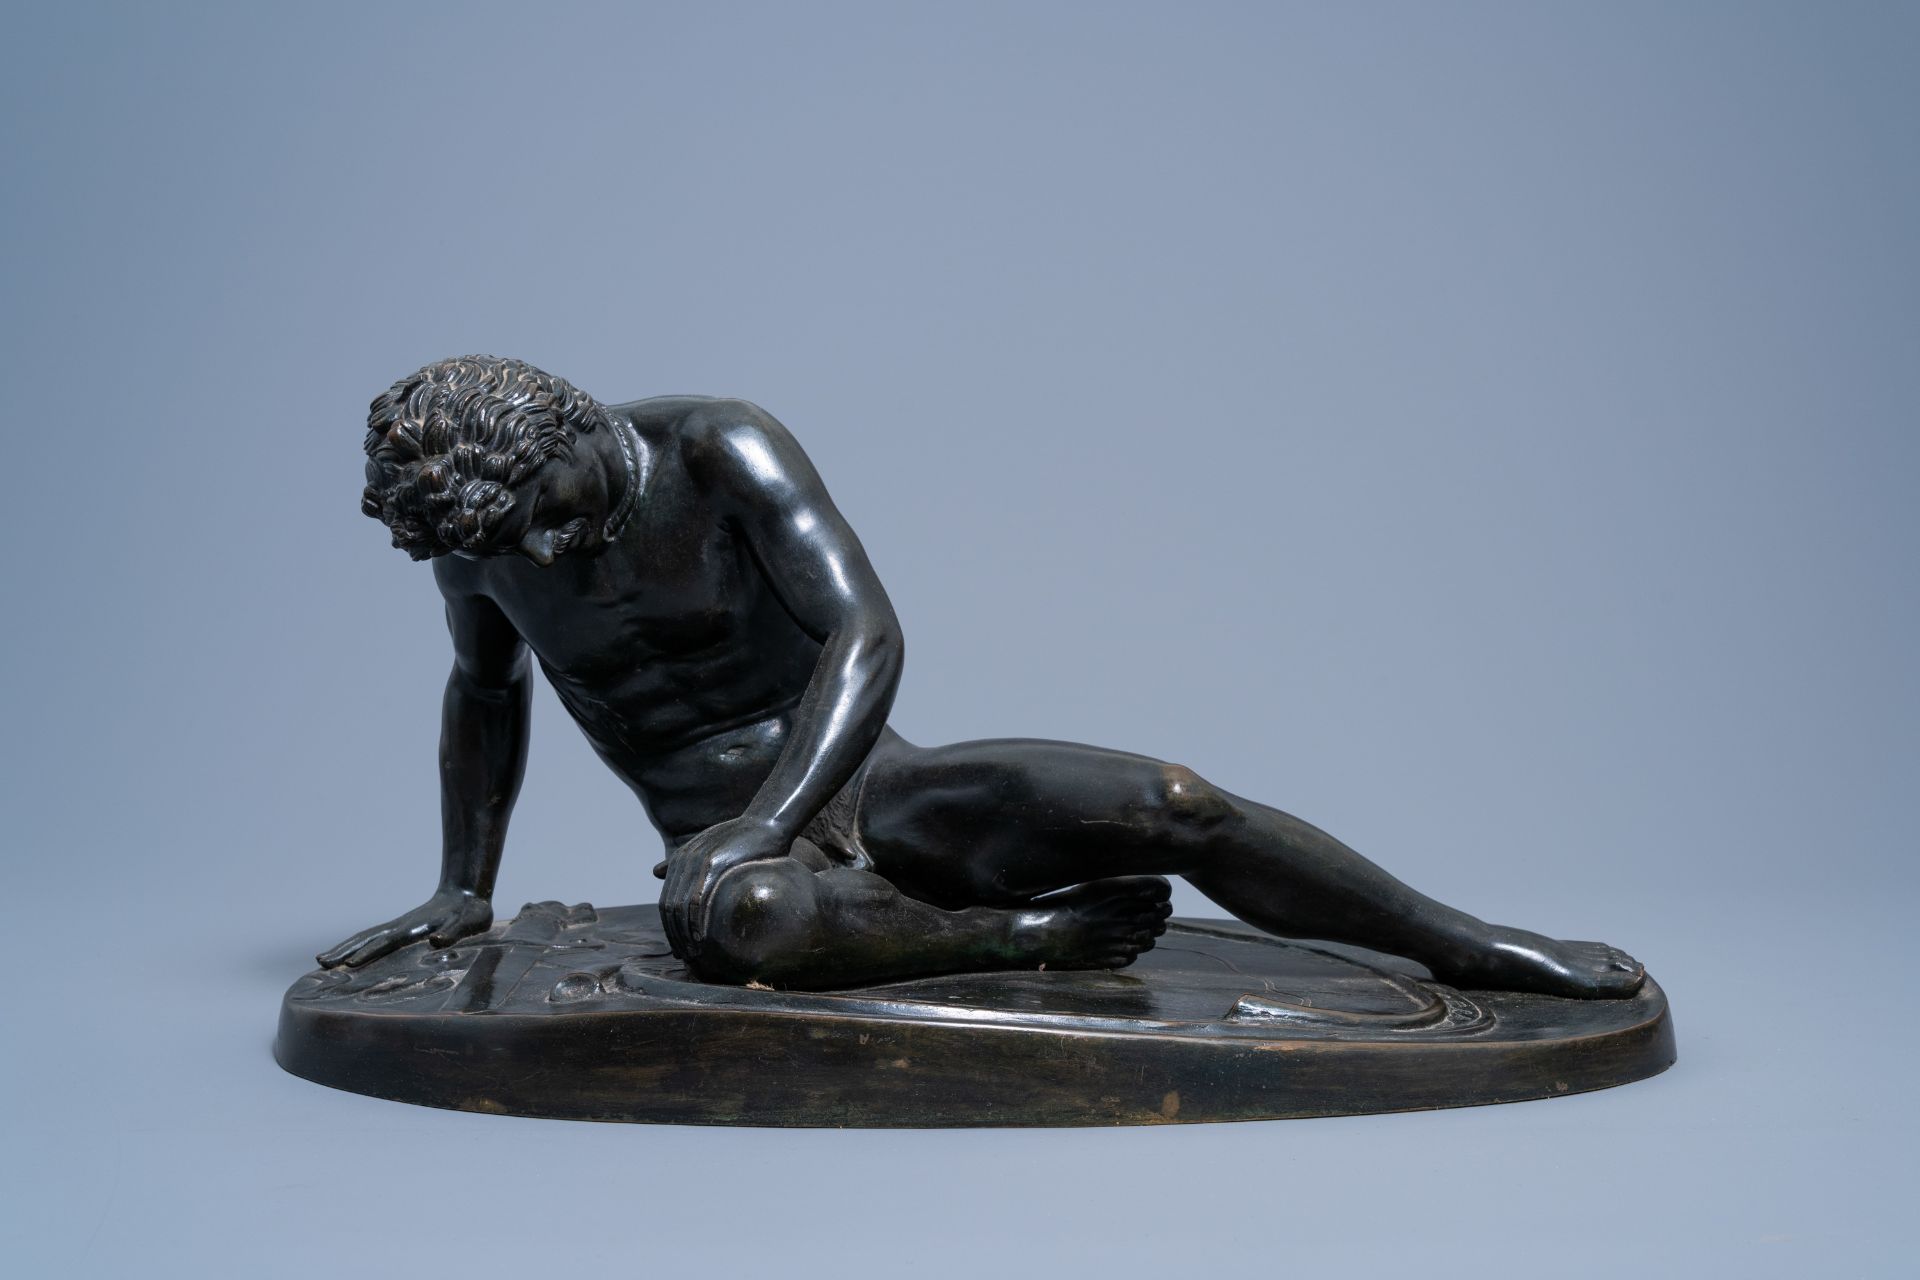 After the antique: The Dying Gaul, patinated bronze on a vert de mer marble base, 19th/20th C. - Image 3 of 11